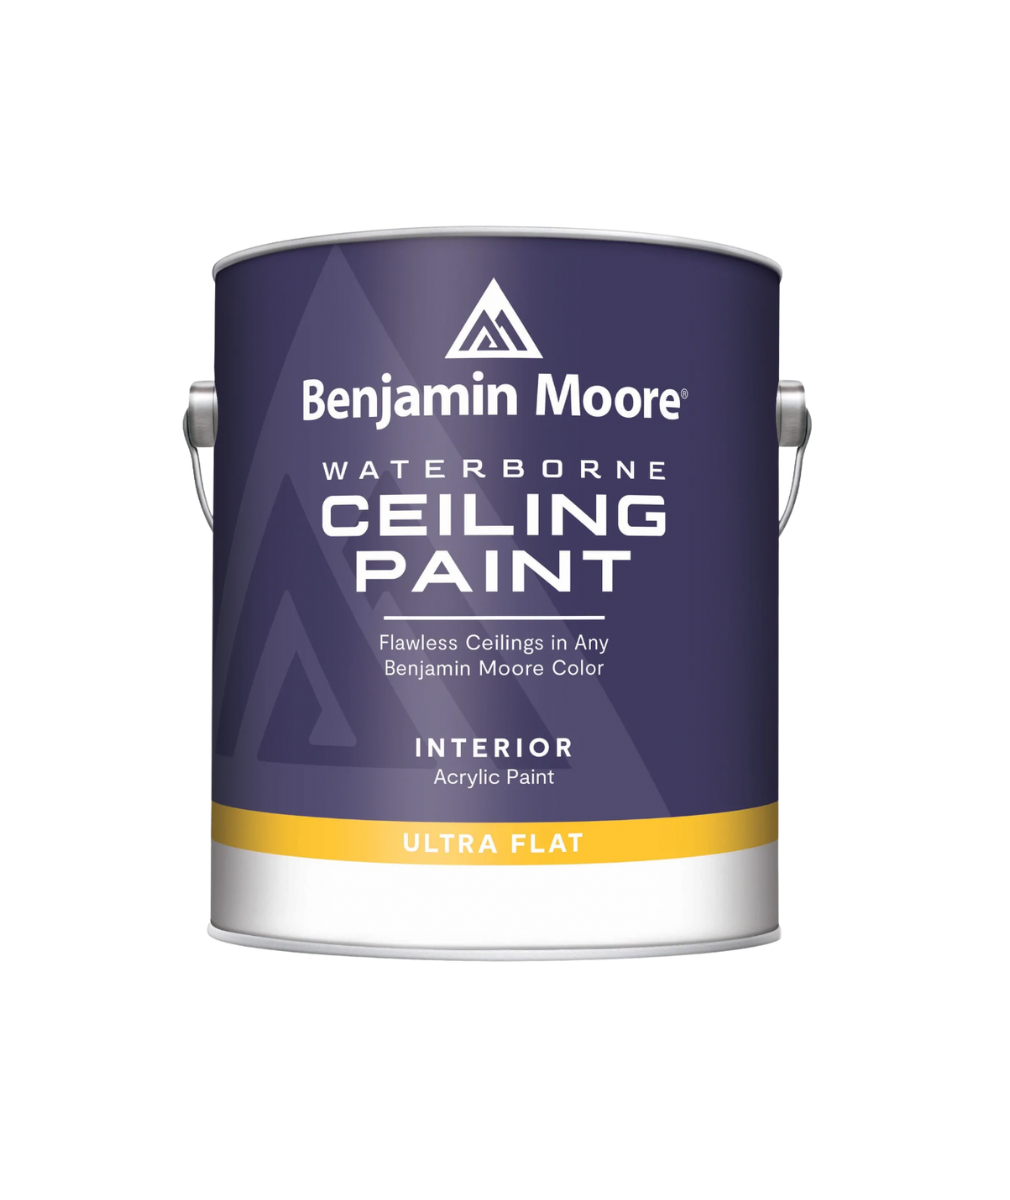 Benjamin Moore Waterborne Ceiling Paint available at Creative Paint in San Francisco, South Bay & East Bay.